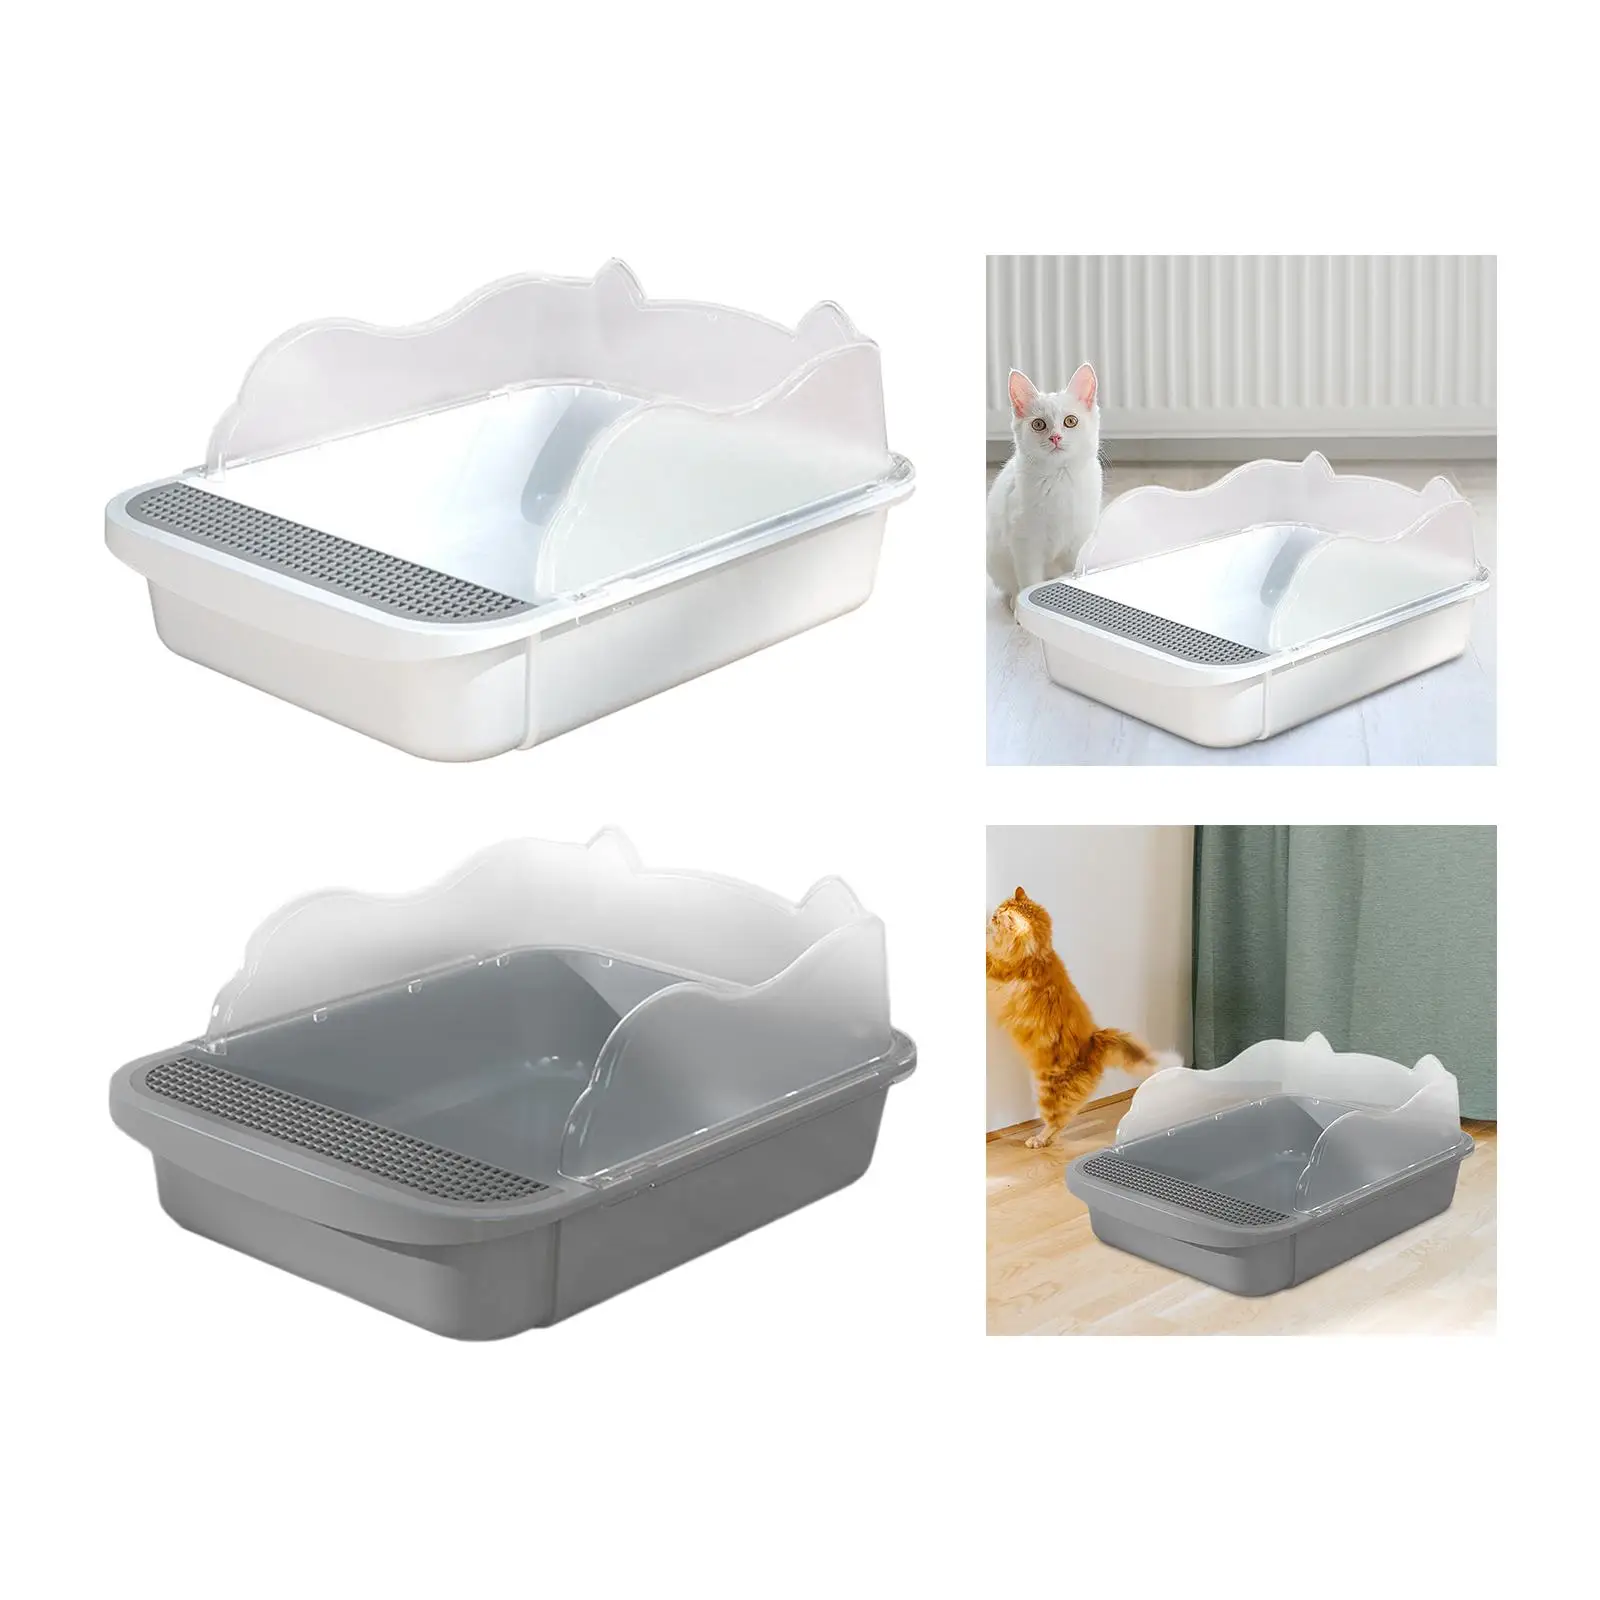 Cat Litter Tray Splashproof with High Sides Semi Closed Cats Litter Pan Litter Pan Pet Supplies for Dog Rabbits Indoor Cats